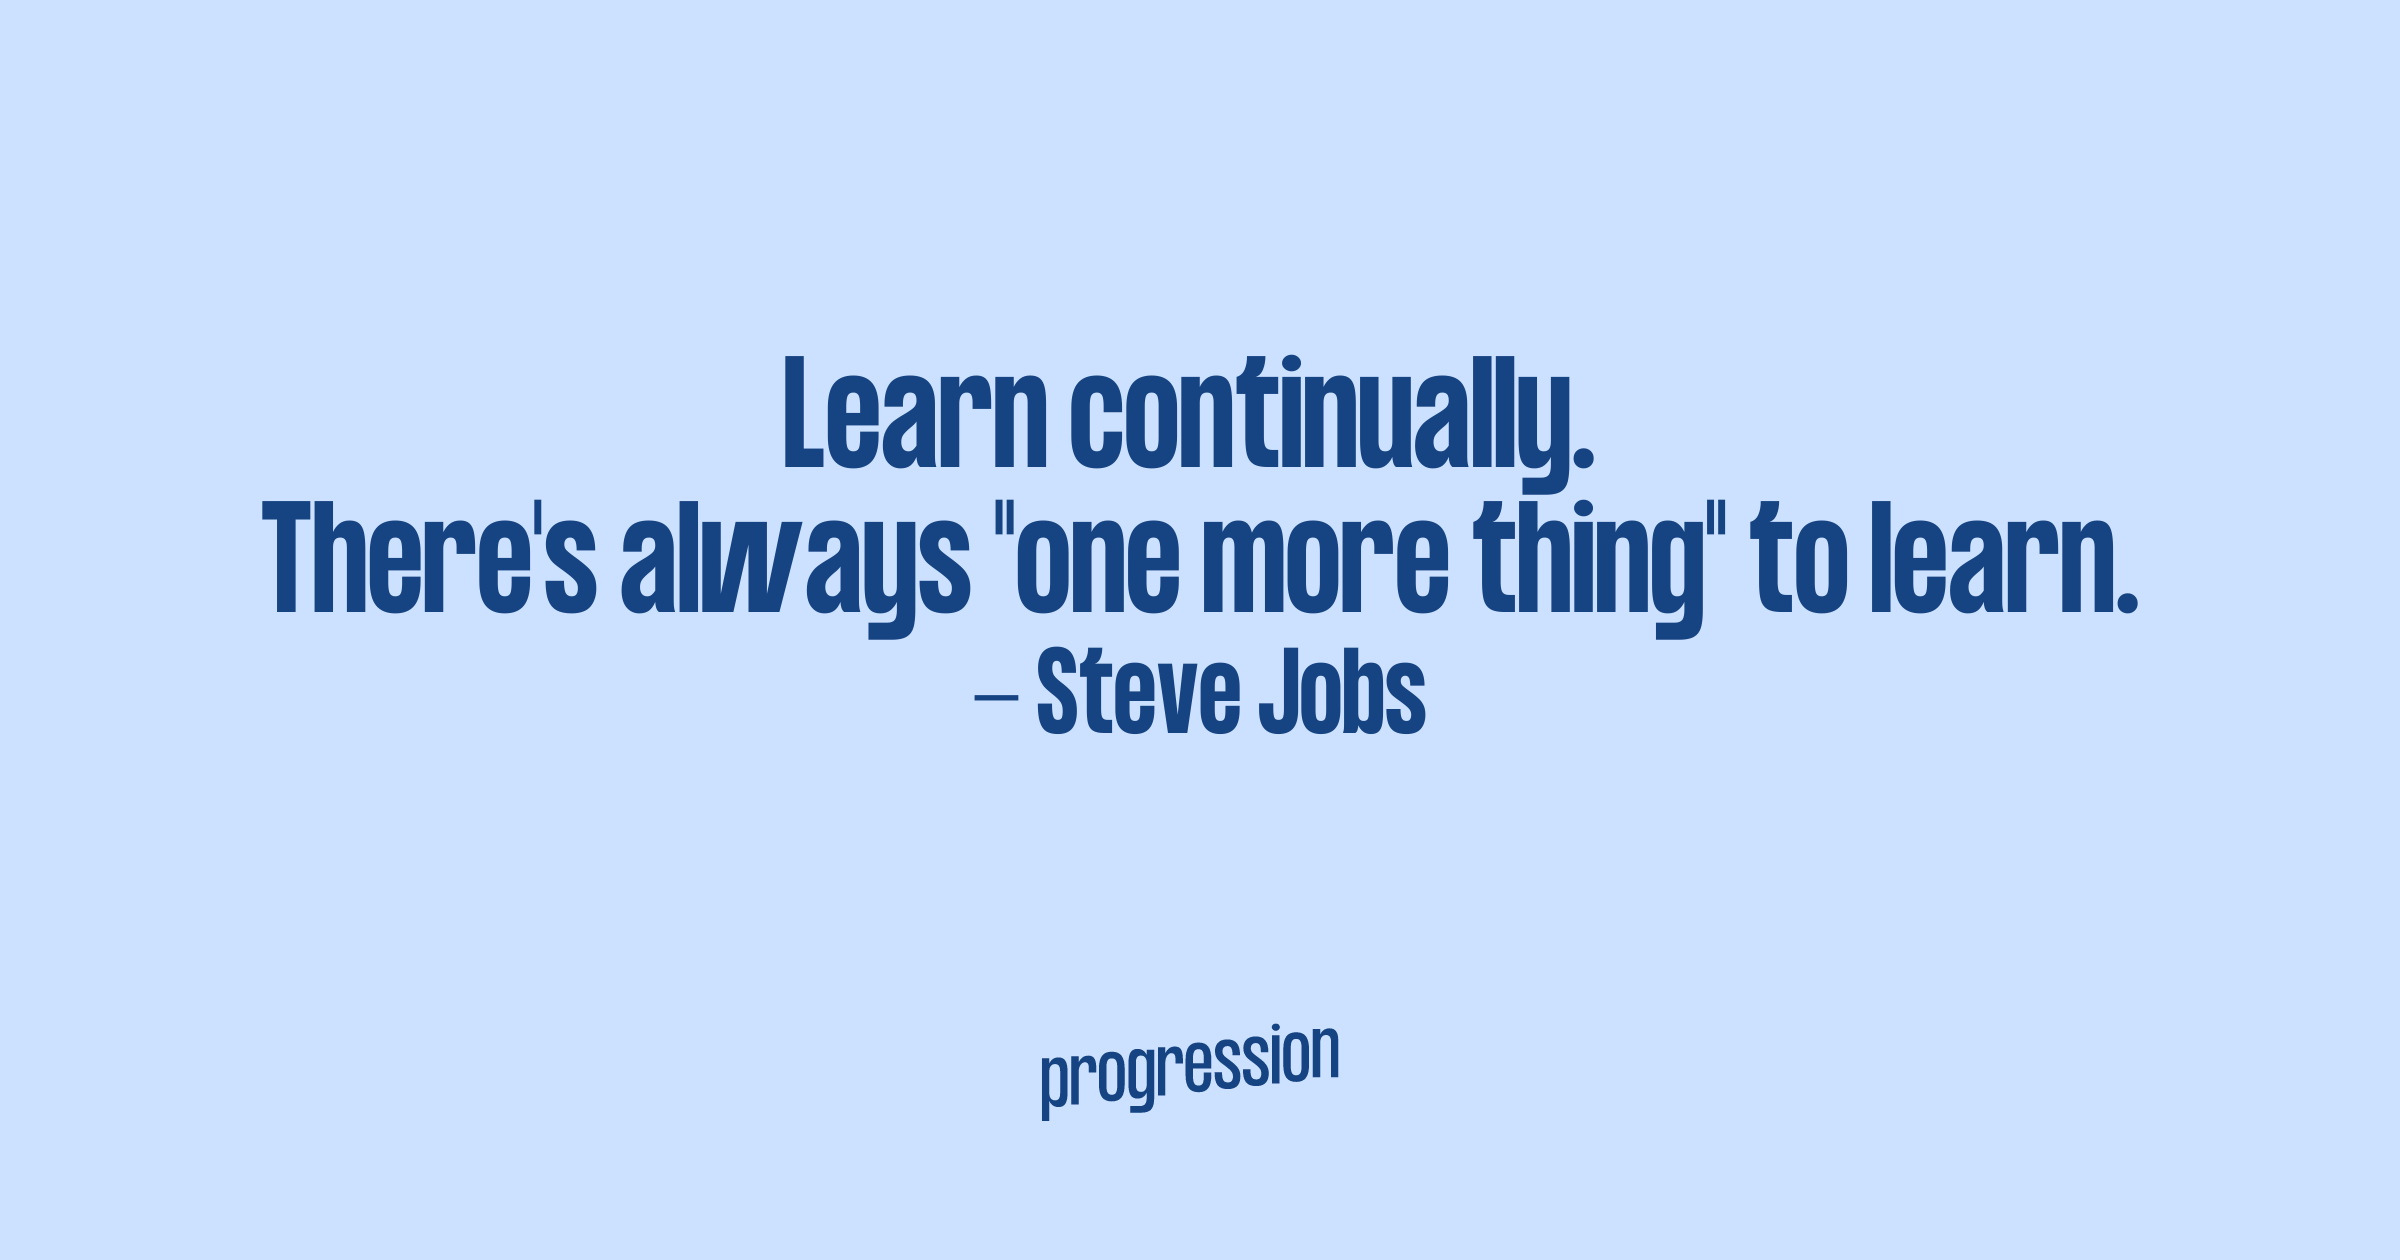 ‘Learn continually. There’s always “one more thing” to learn’ — quote from Steve Jobs